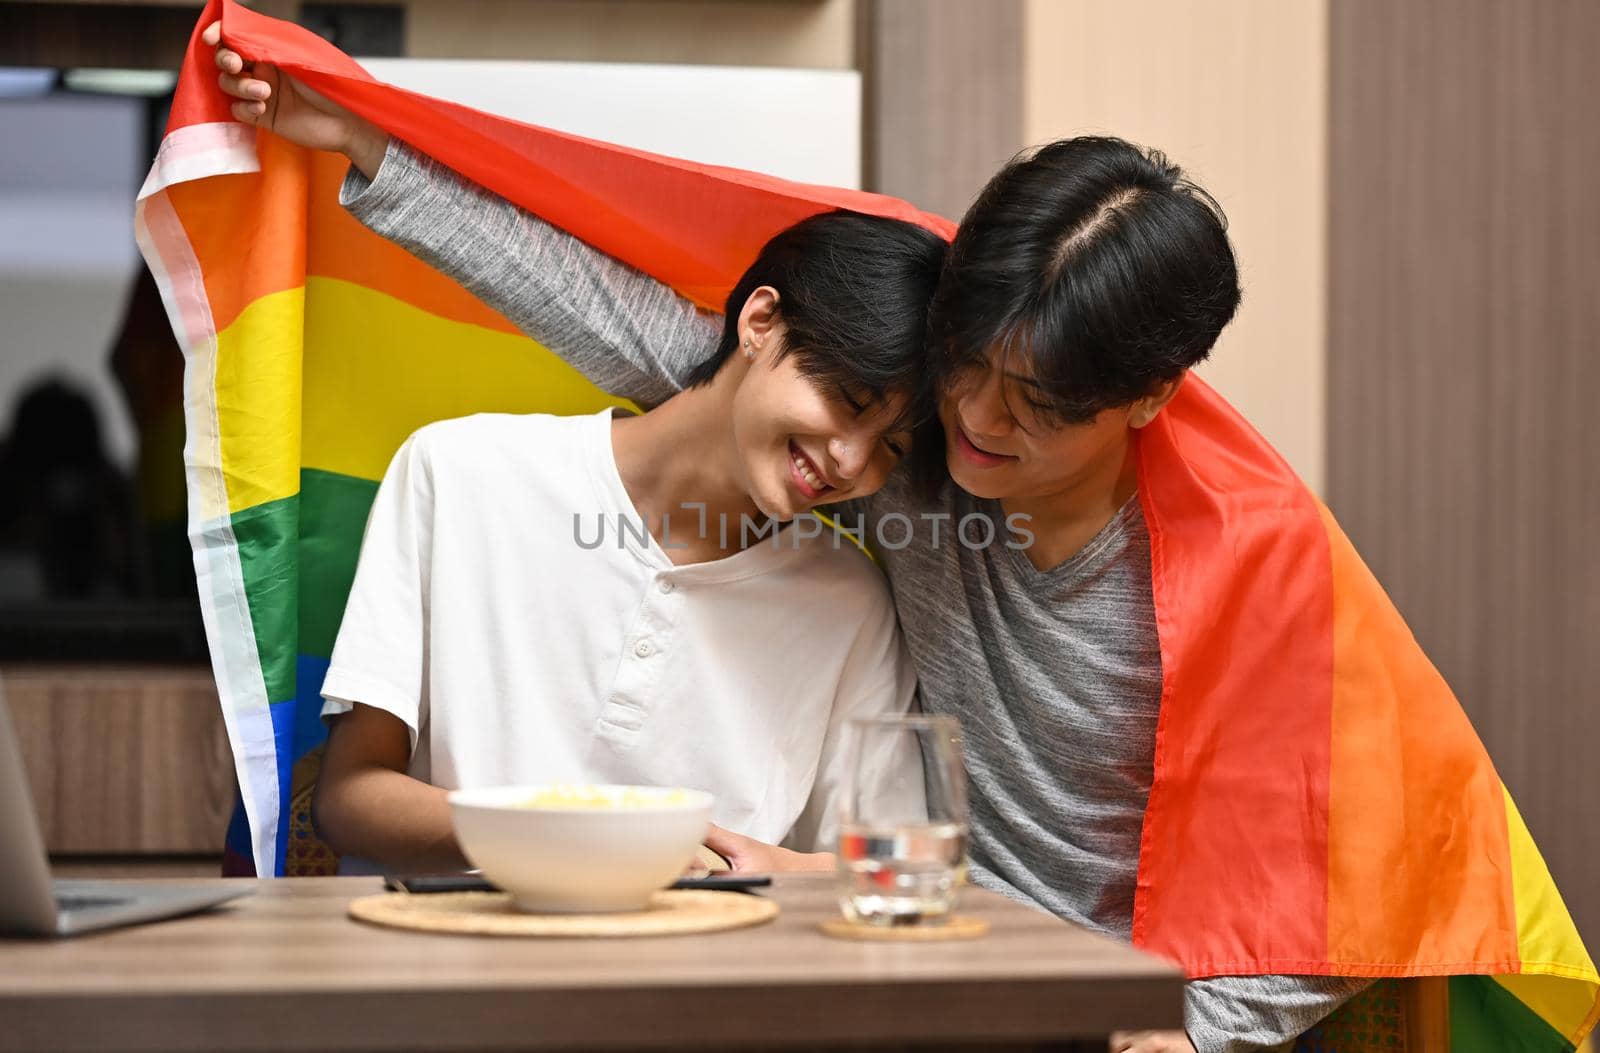 Young gay couple under LGBTQ pride flag. Concept of sexual freedom and equal rights for LGBT community.